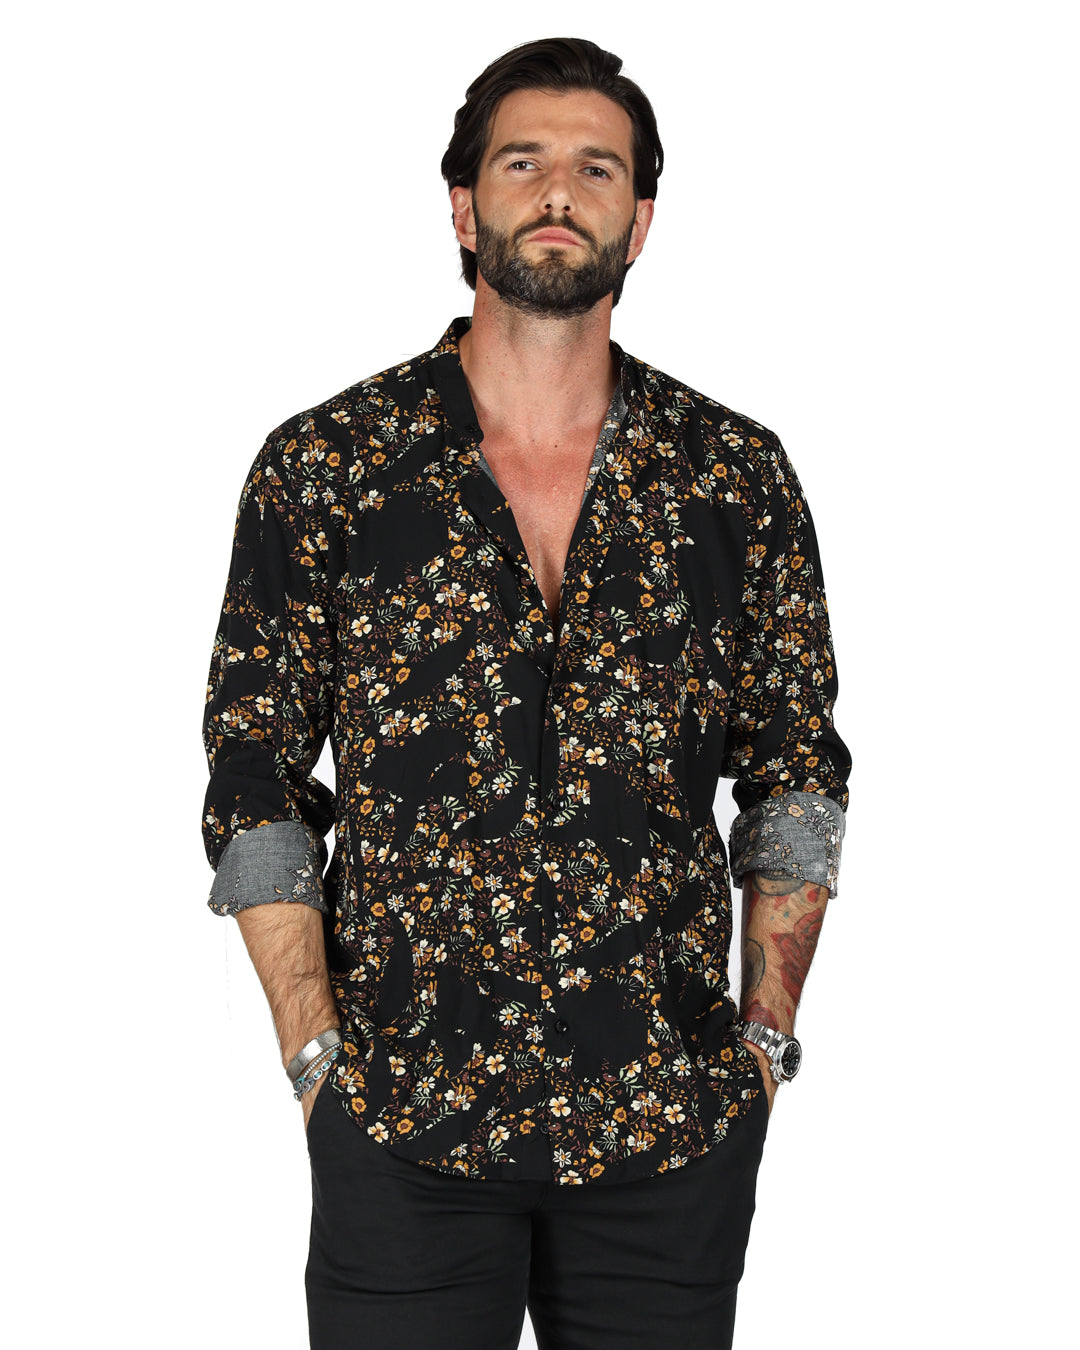 Curacao - Brown floral patterned Korean shirt